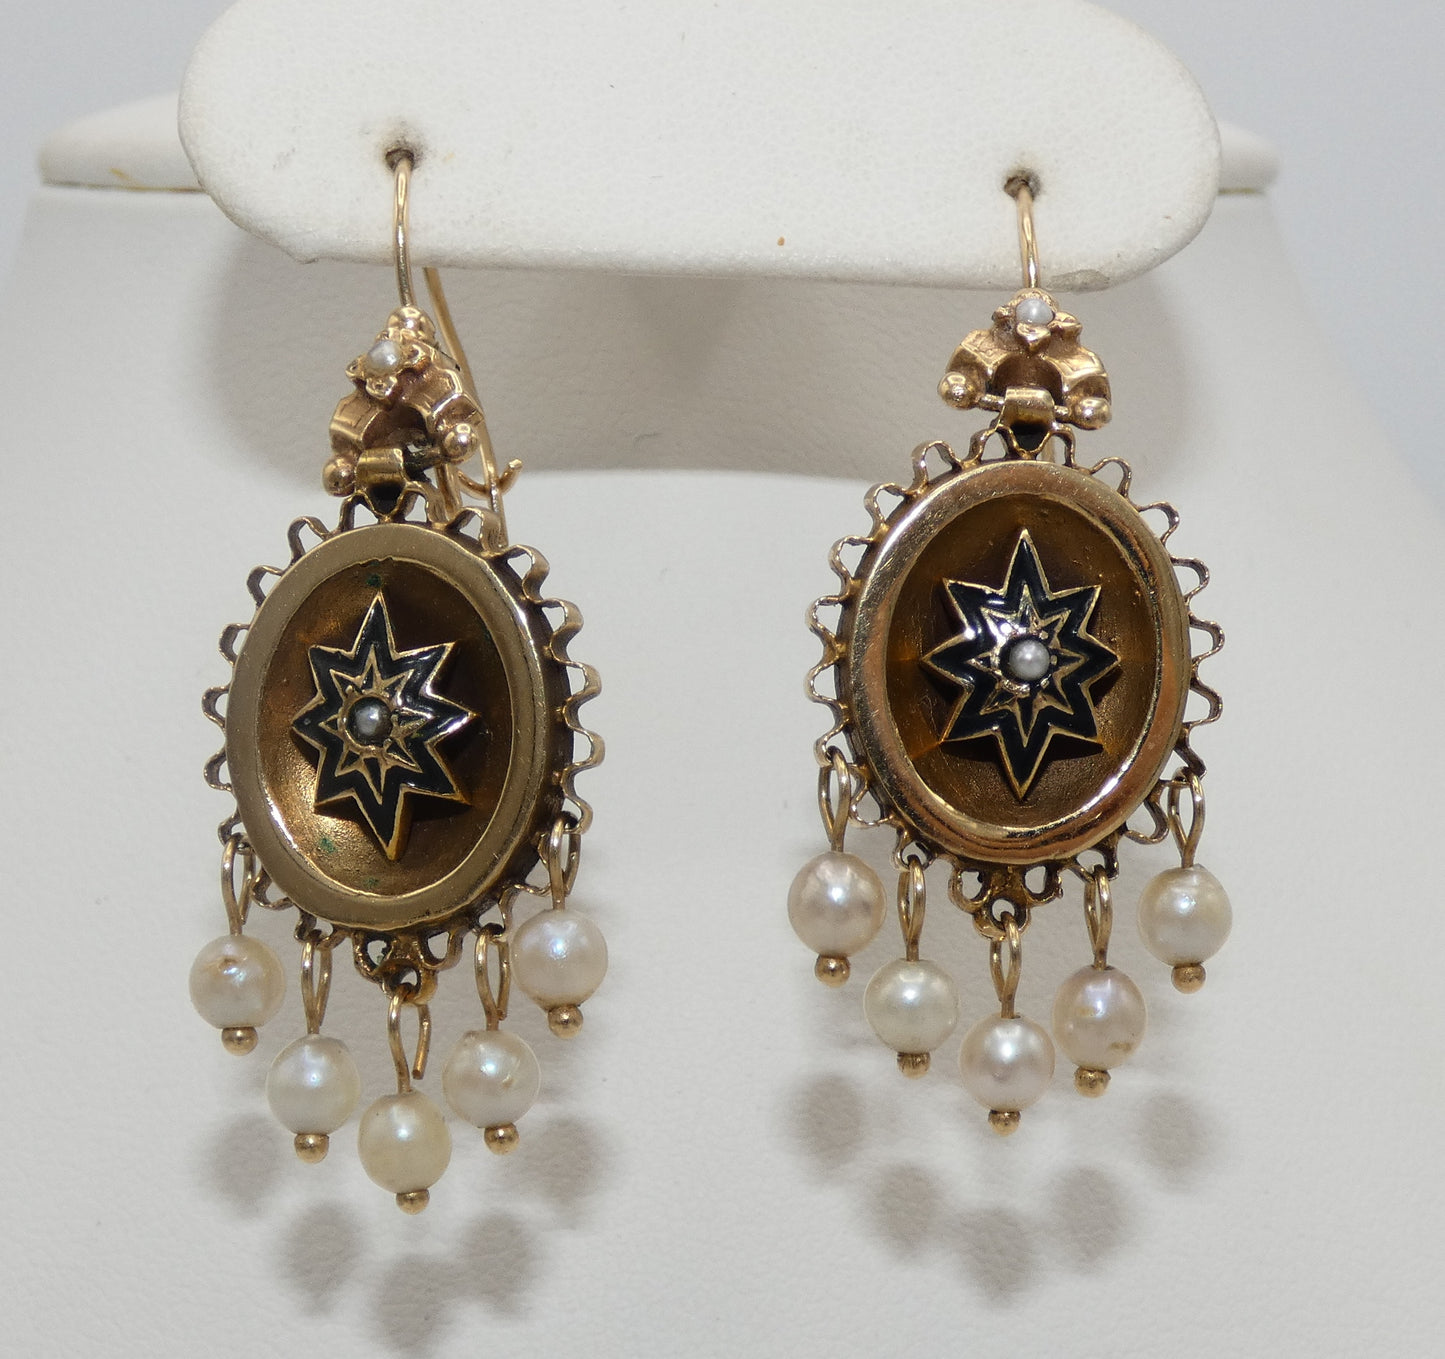 14K Gold Star Earrings with Pearls